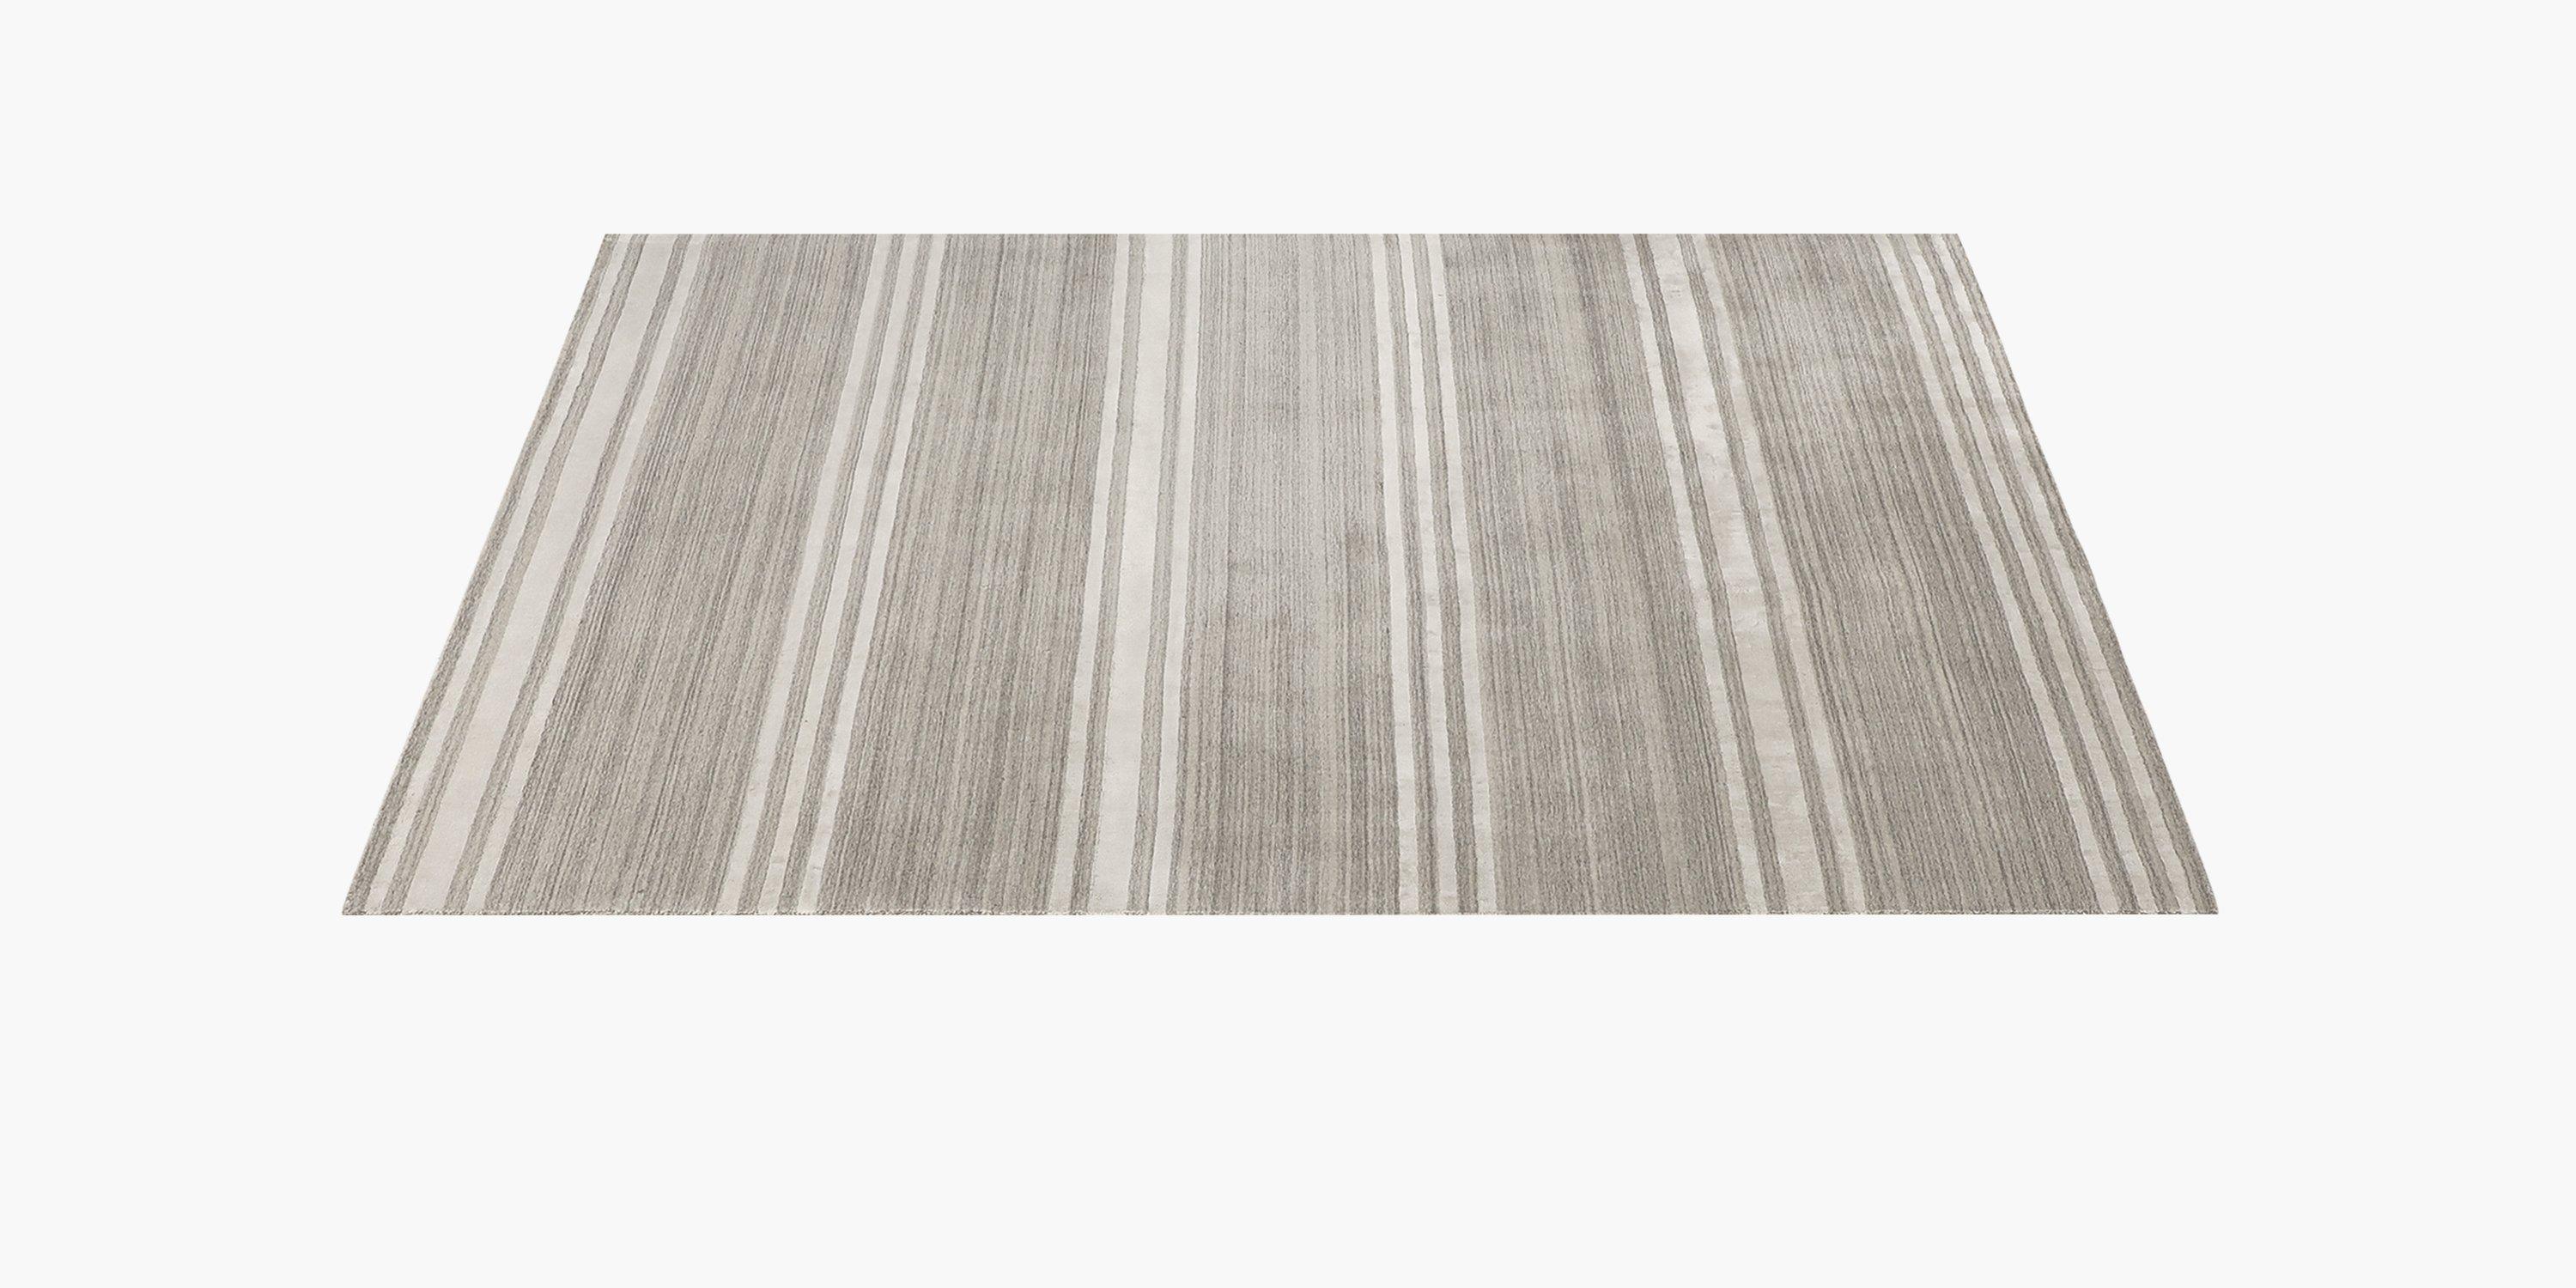 Luxuriously soft and handsomely patterned, our rug offers plushness and a hint of shine. Handwoven from varying lengths of soft, lustrous New Zealand wool, the Rayado's multi-textural surface adds visual interest to any space. Its natural colors